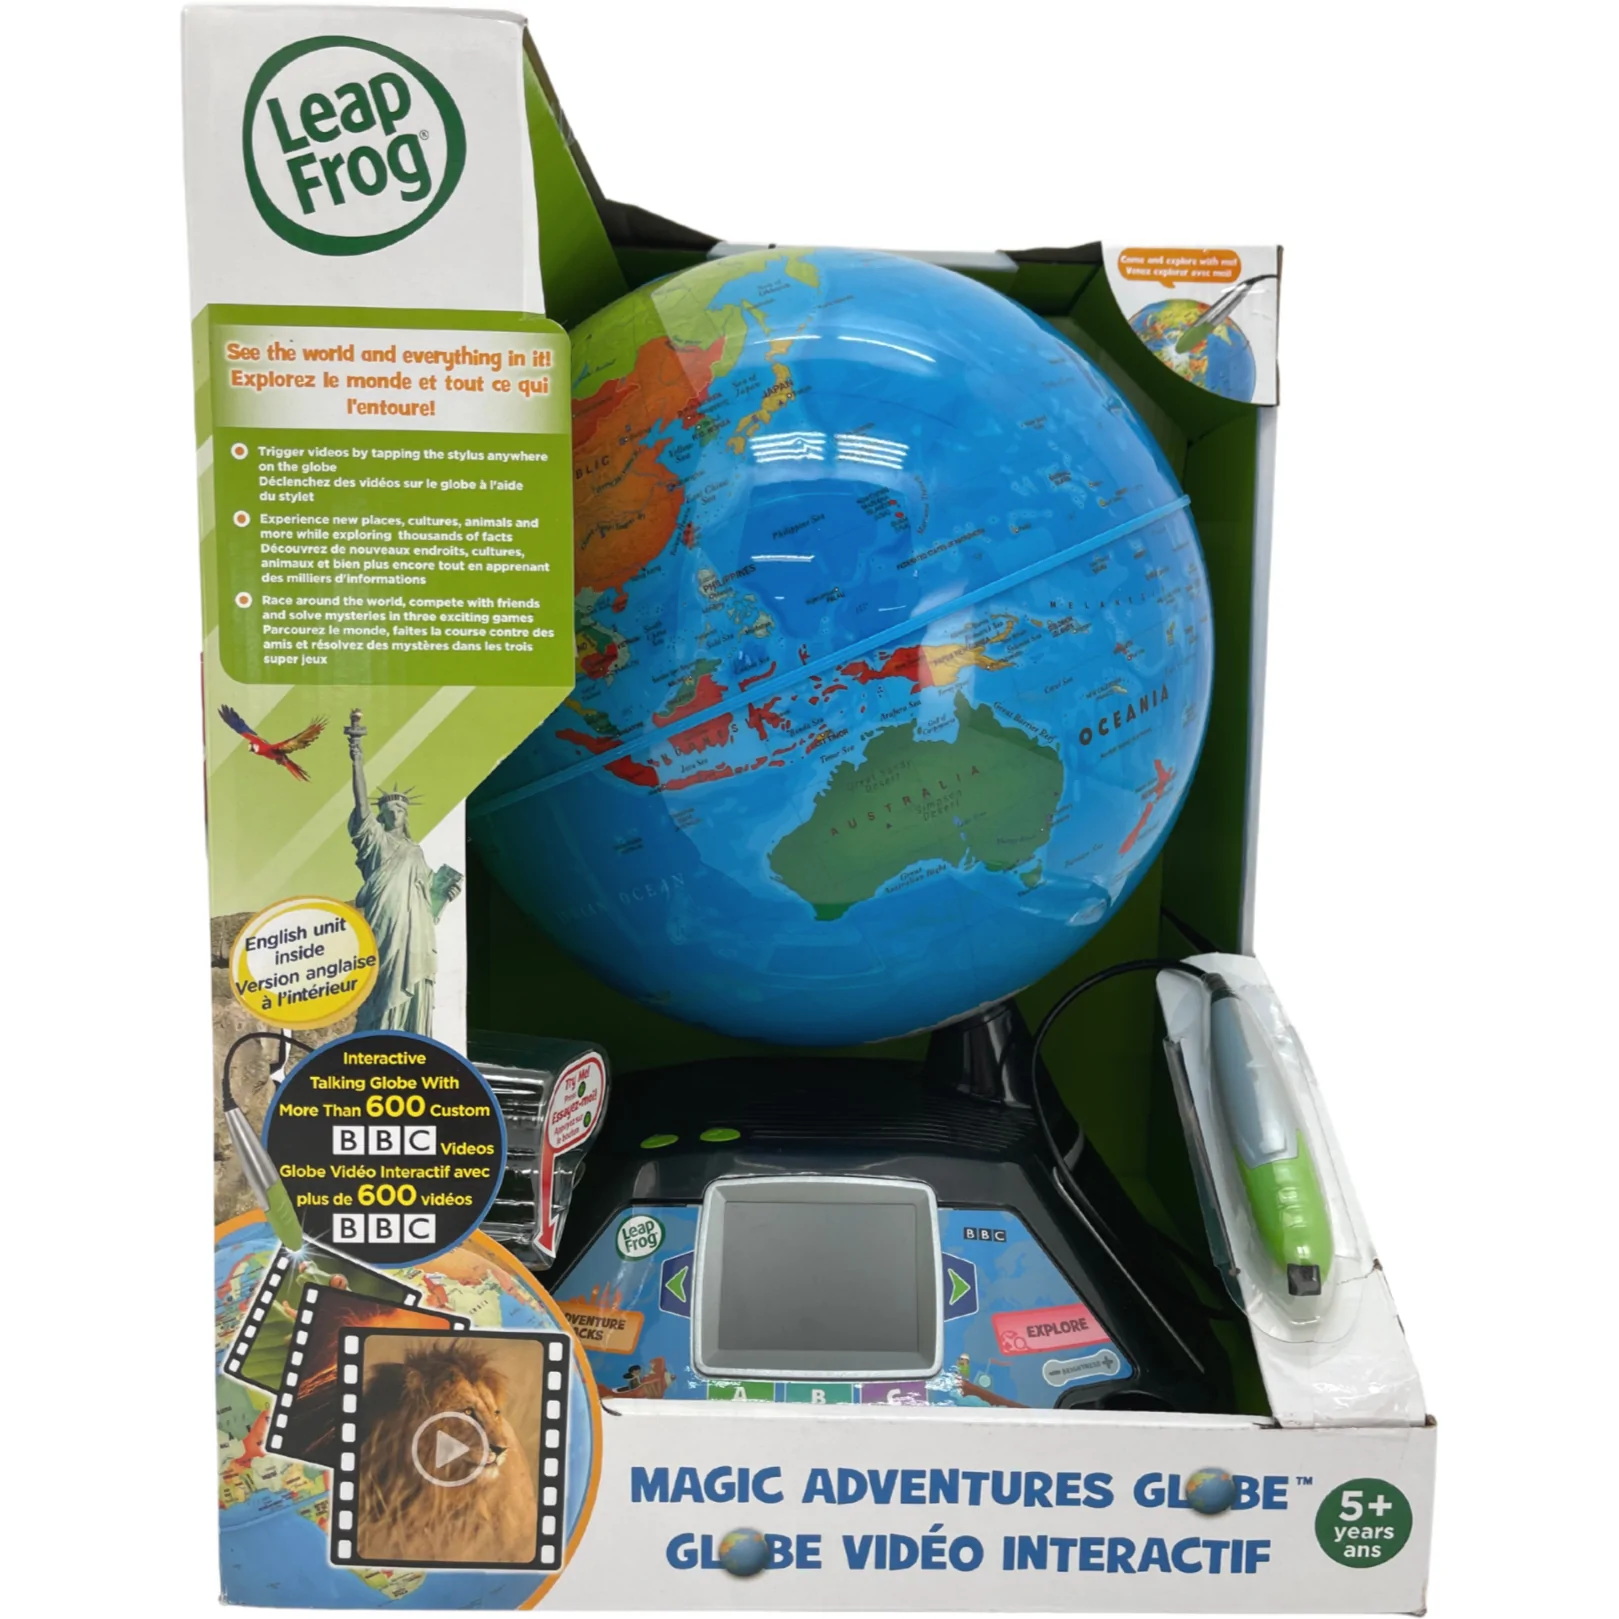 LeapFrog Magic Adventures Globe Educational Toy by Vtech